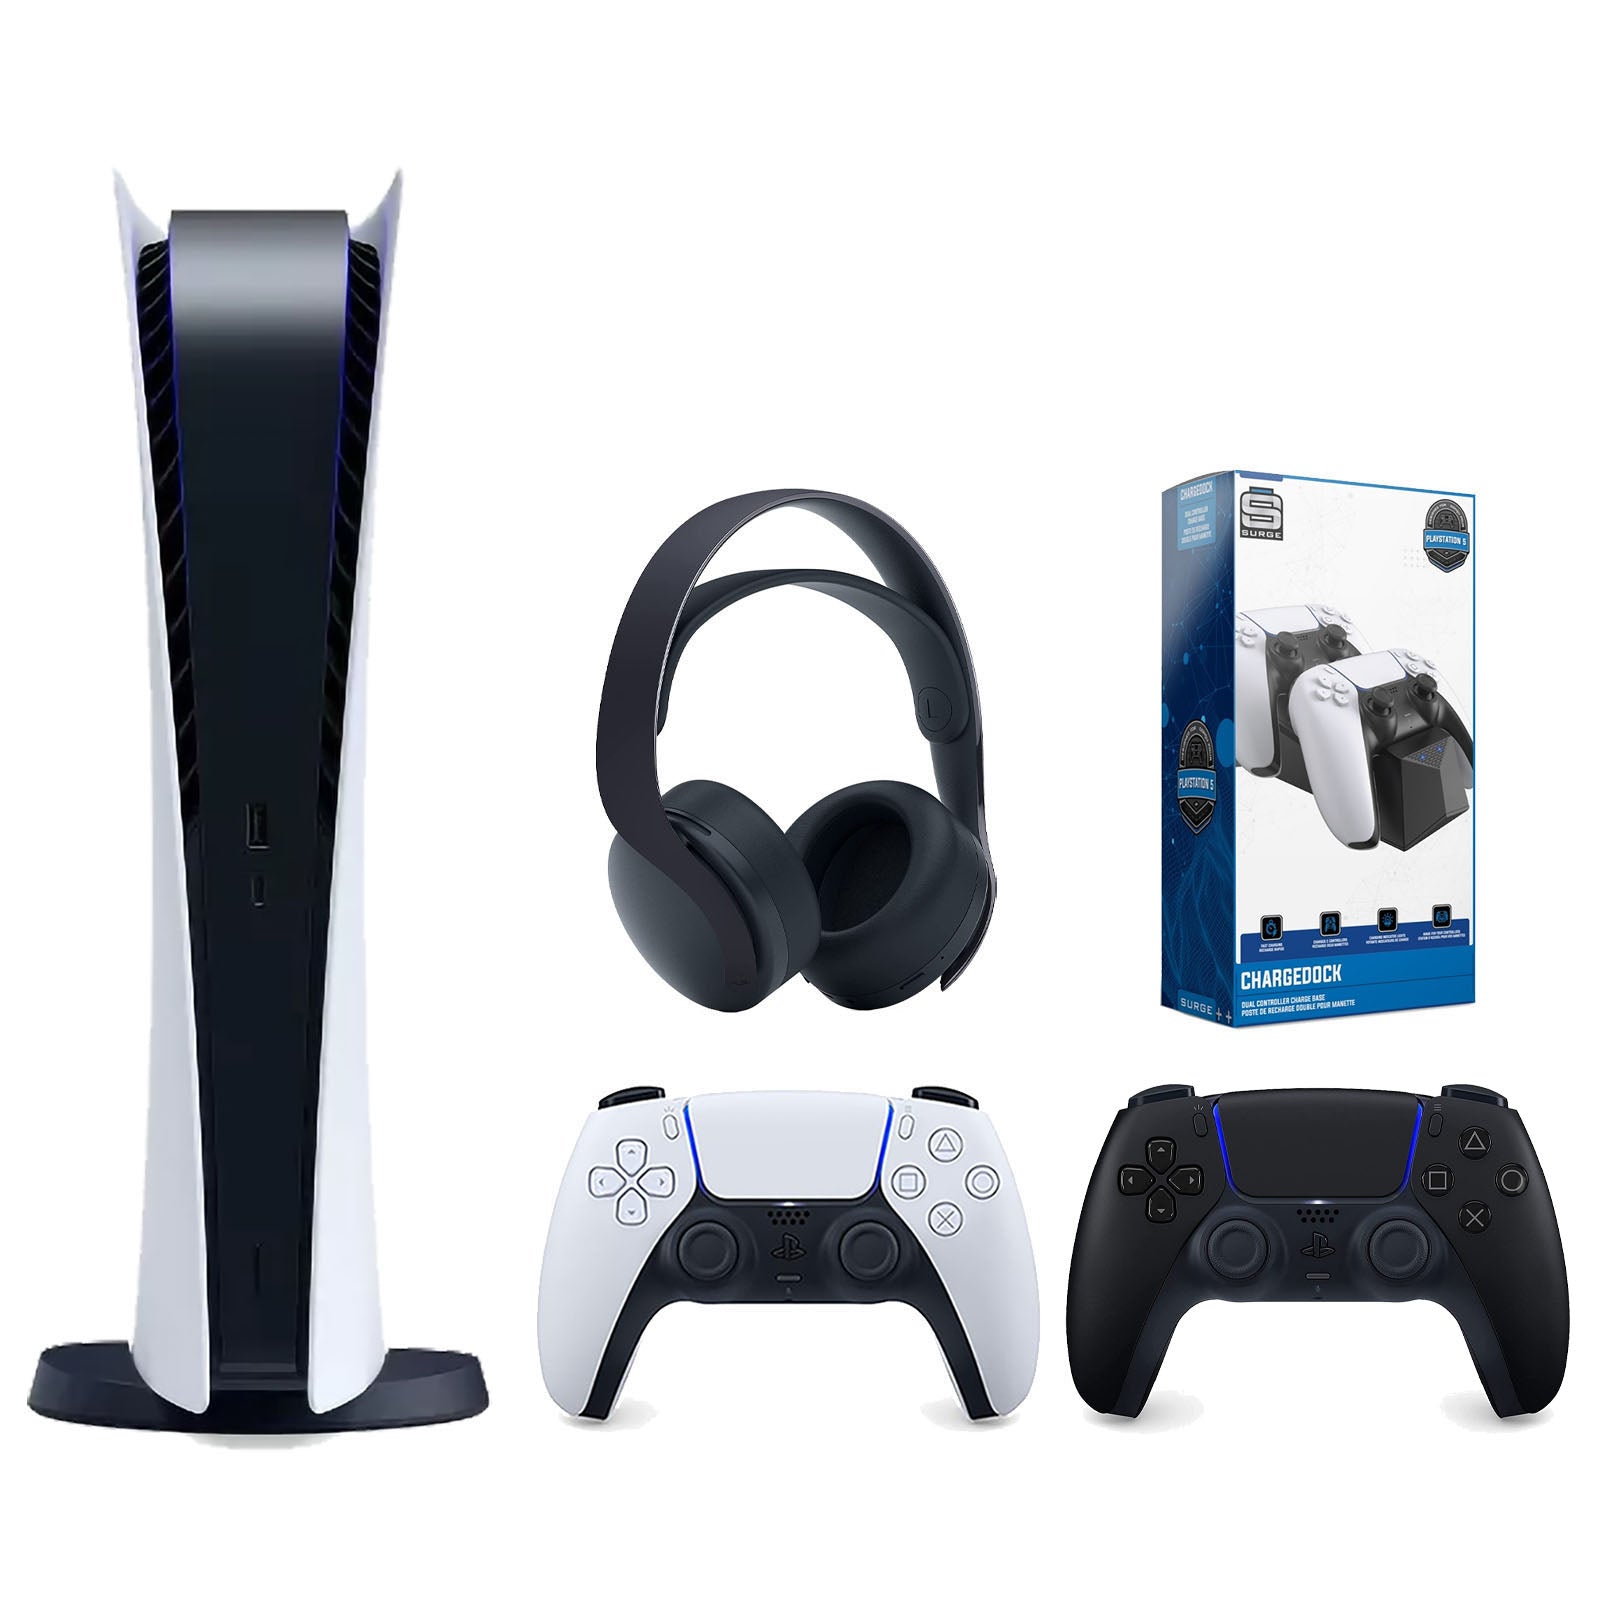 Sony Playstation 5 Digital Edition Console with Extra Black Controller, Black PULSE 3D Headset and Surge Dual Controller Charge Dock Bundle - Pro-Distributing